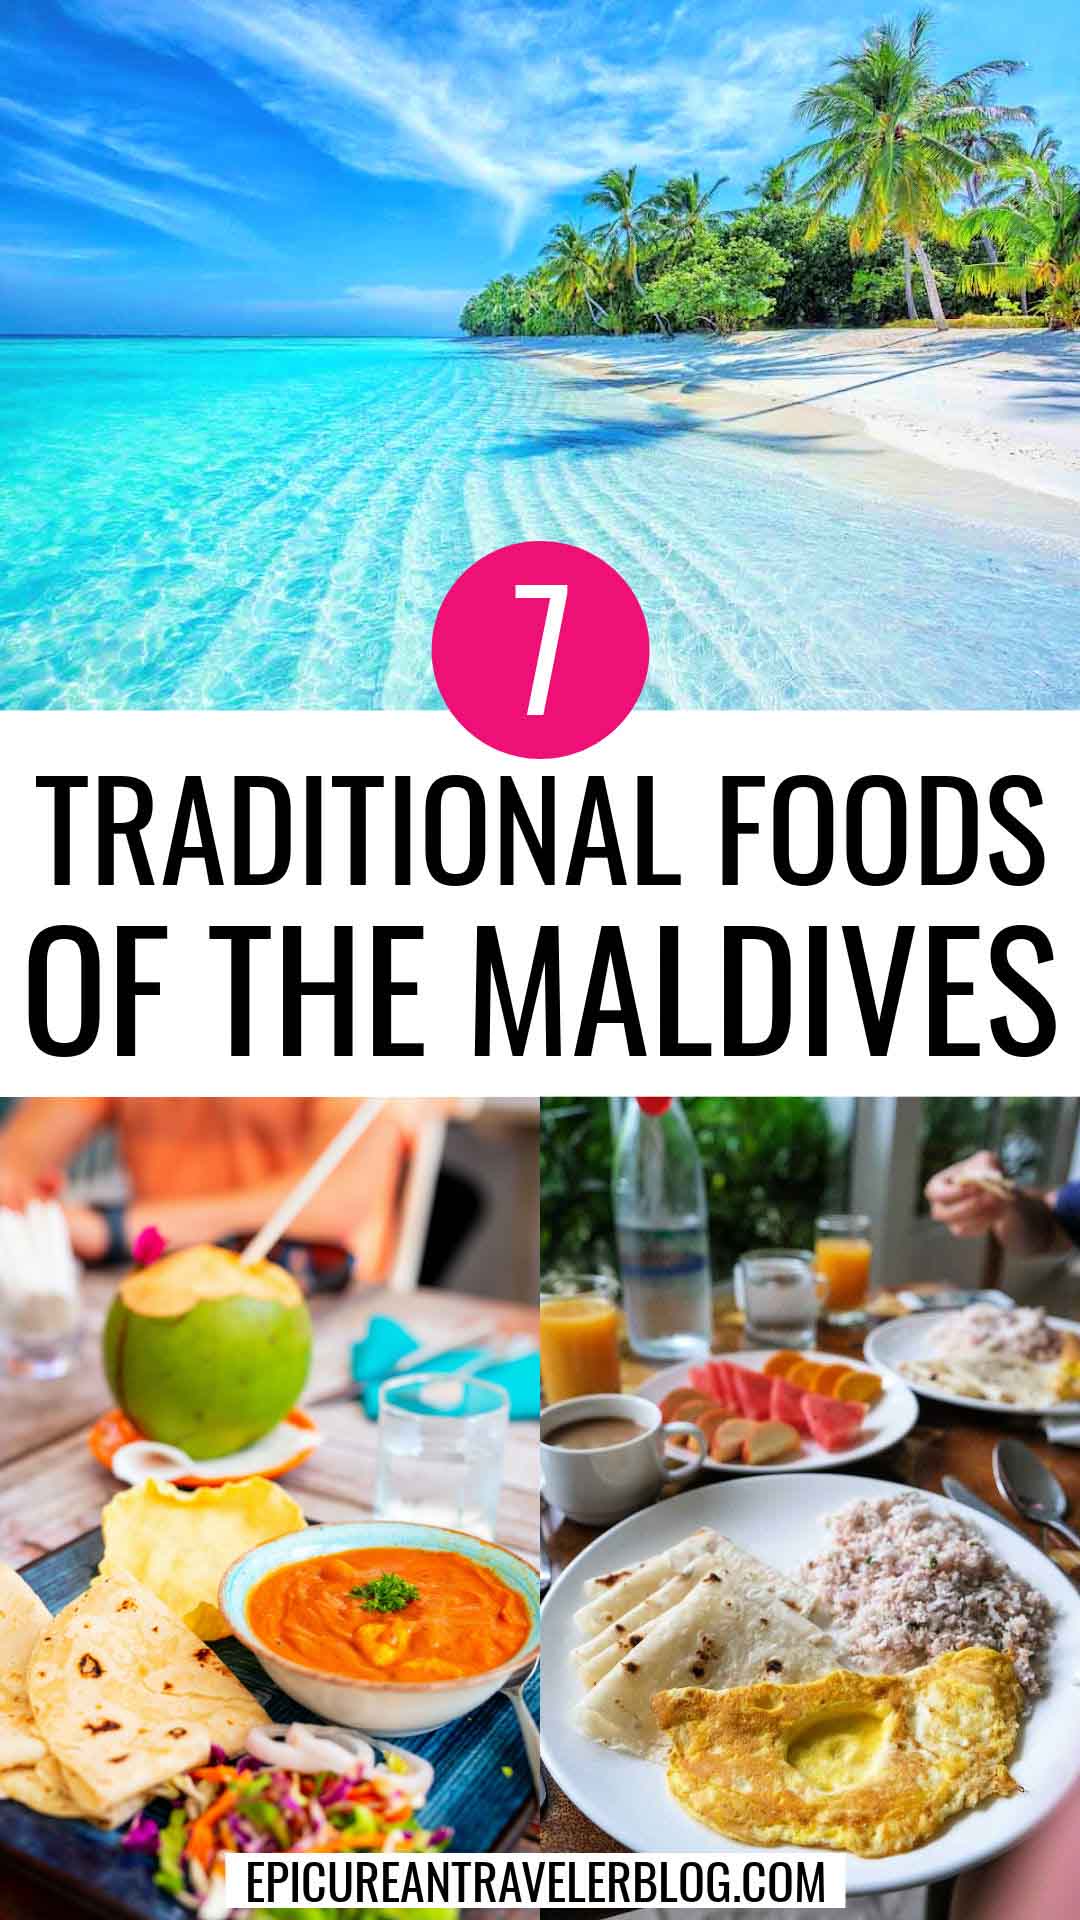 7 traditional foods of the Maldives with images of a white-sand beach in the Maldives and two traditional Maldivian dishes, mas huni and mas rahi